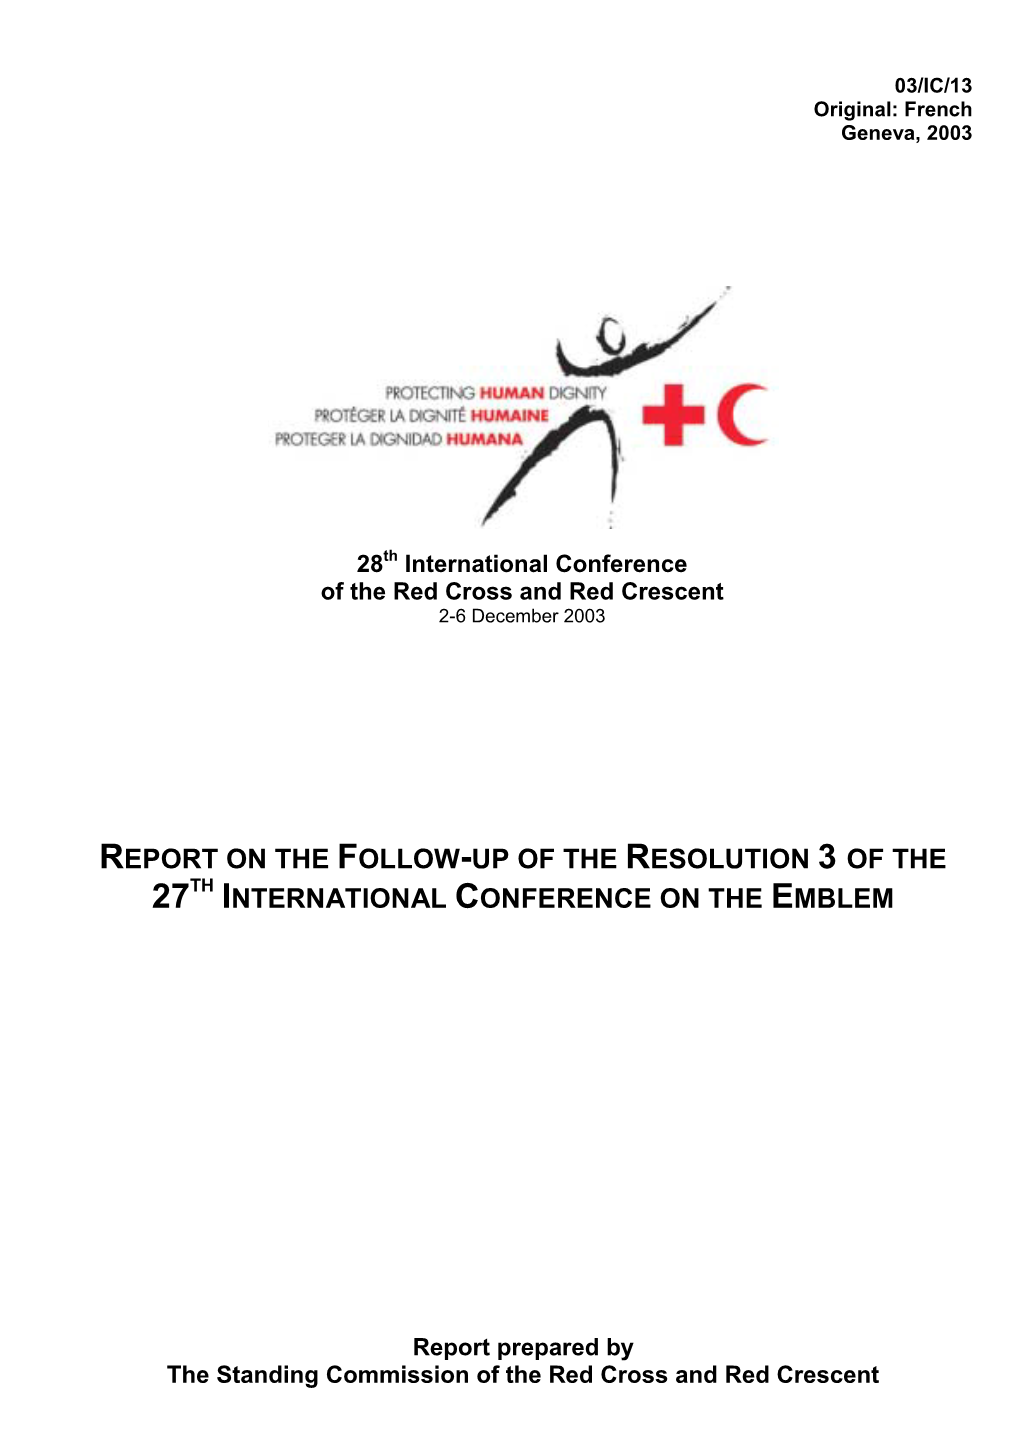 Report on the Follow-Up of the Resolution 3 of the 27Th International Conference on the Emblem